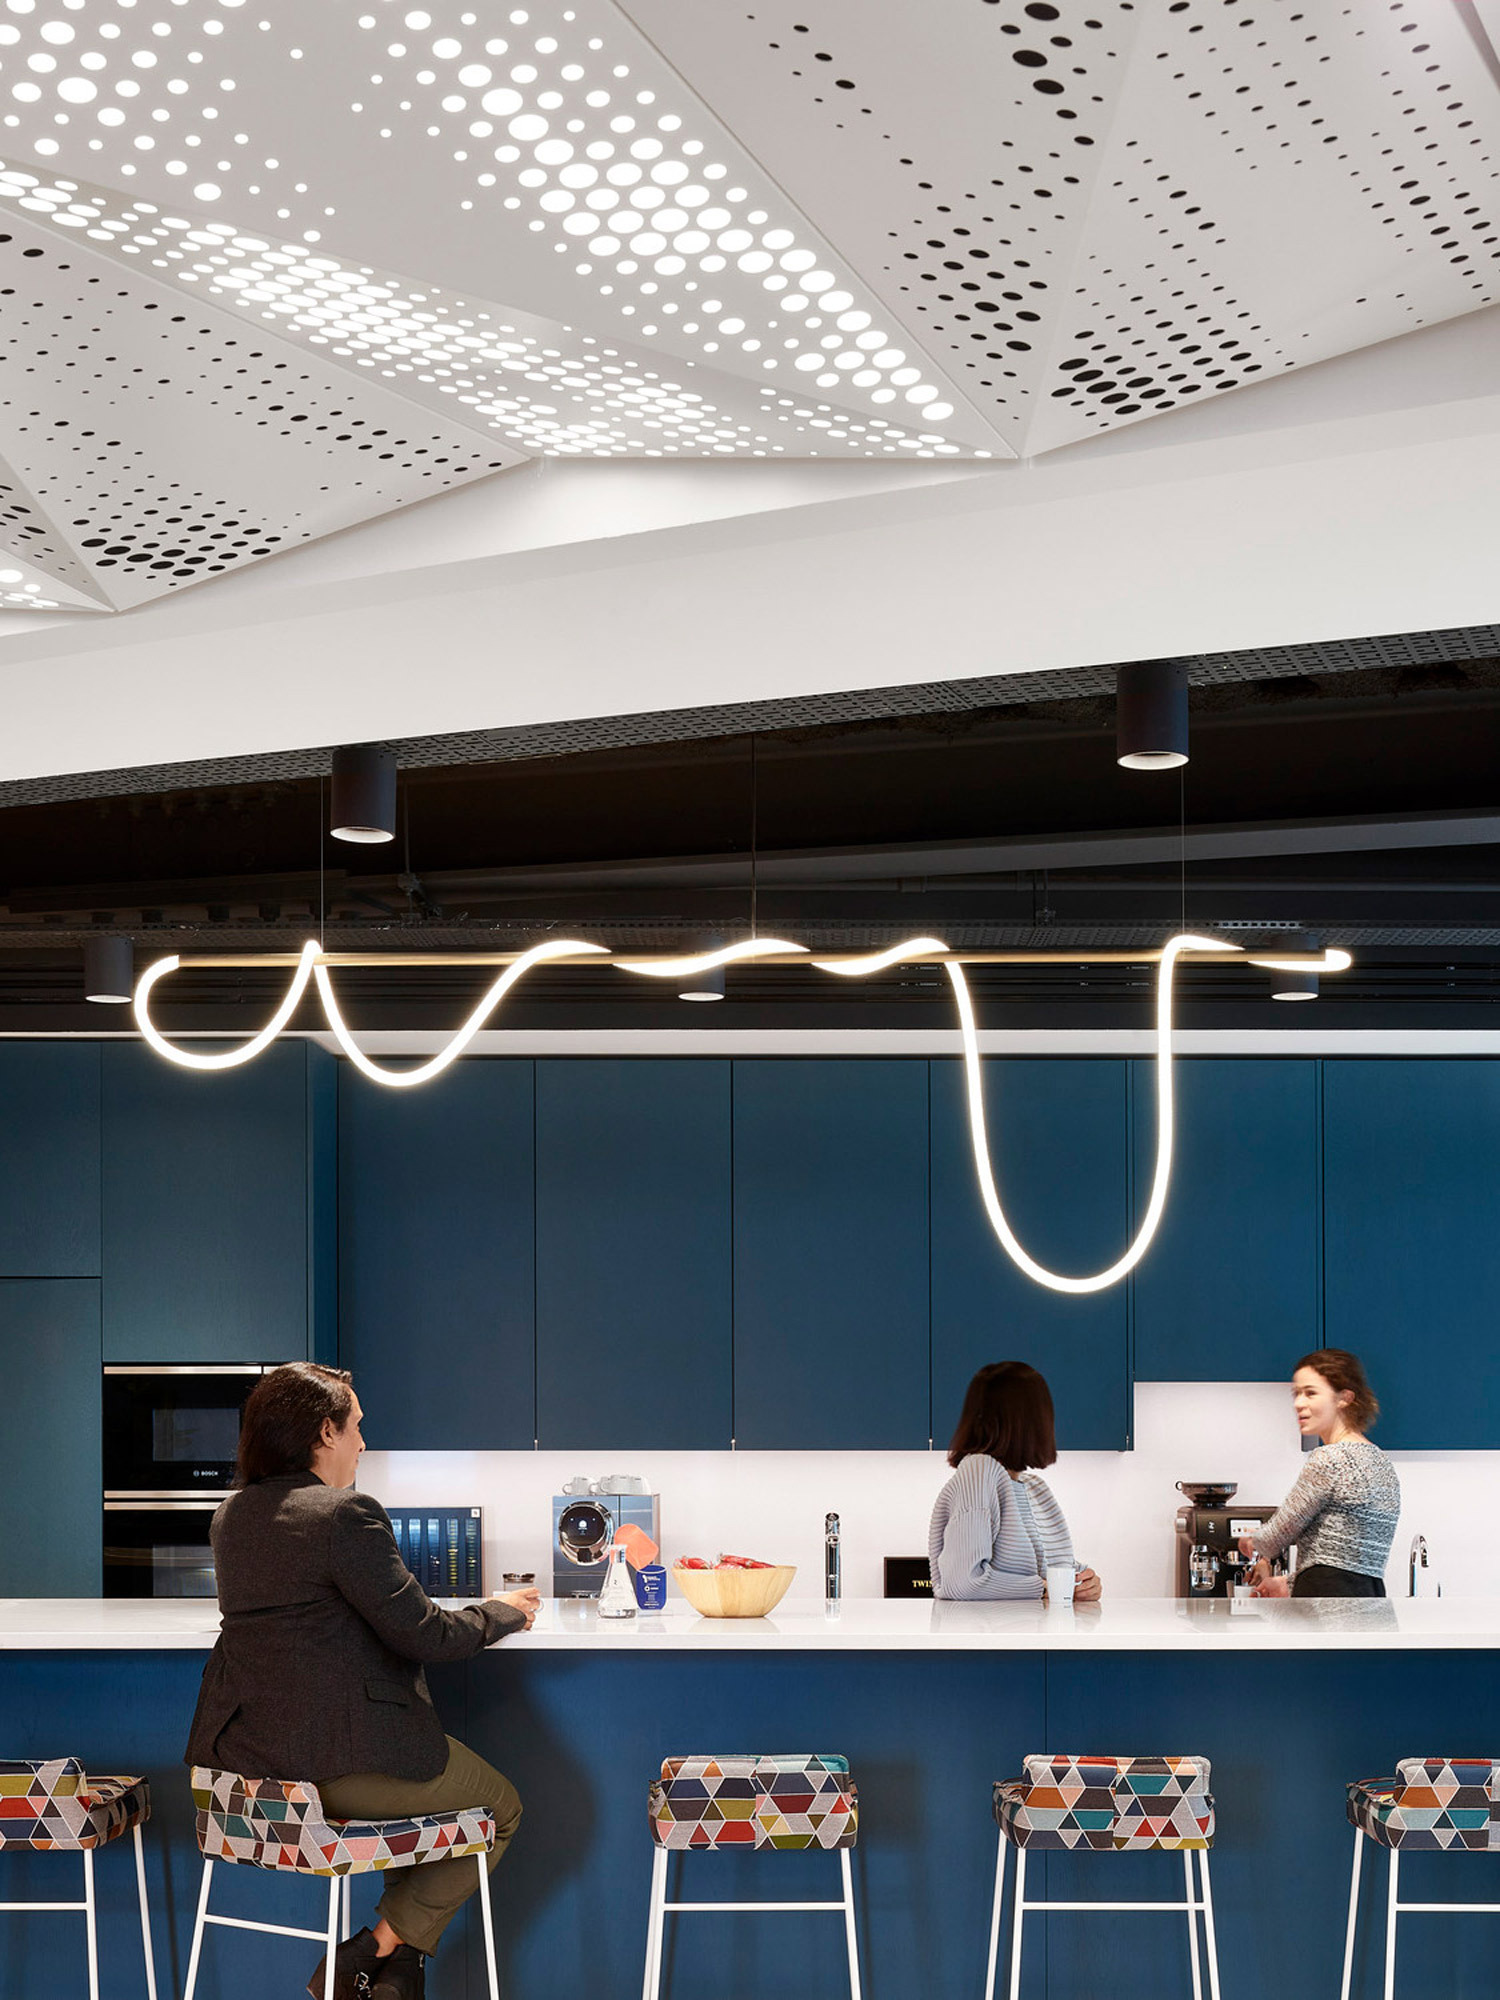 Modern kitchen workspace featuring cobalt blue cabinetry, whimsical overhead LED lighting resembling a squiggled line, and geometrically patterned bar stools. Perforated ceiling panels add texture and acoustic functionality above a conversational seating area.